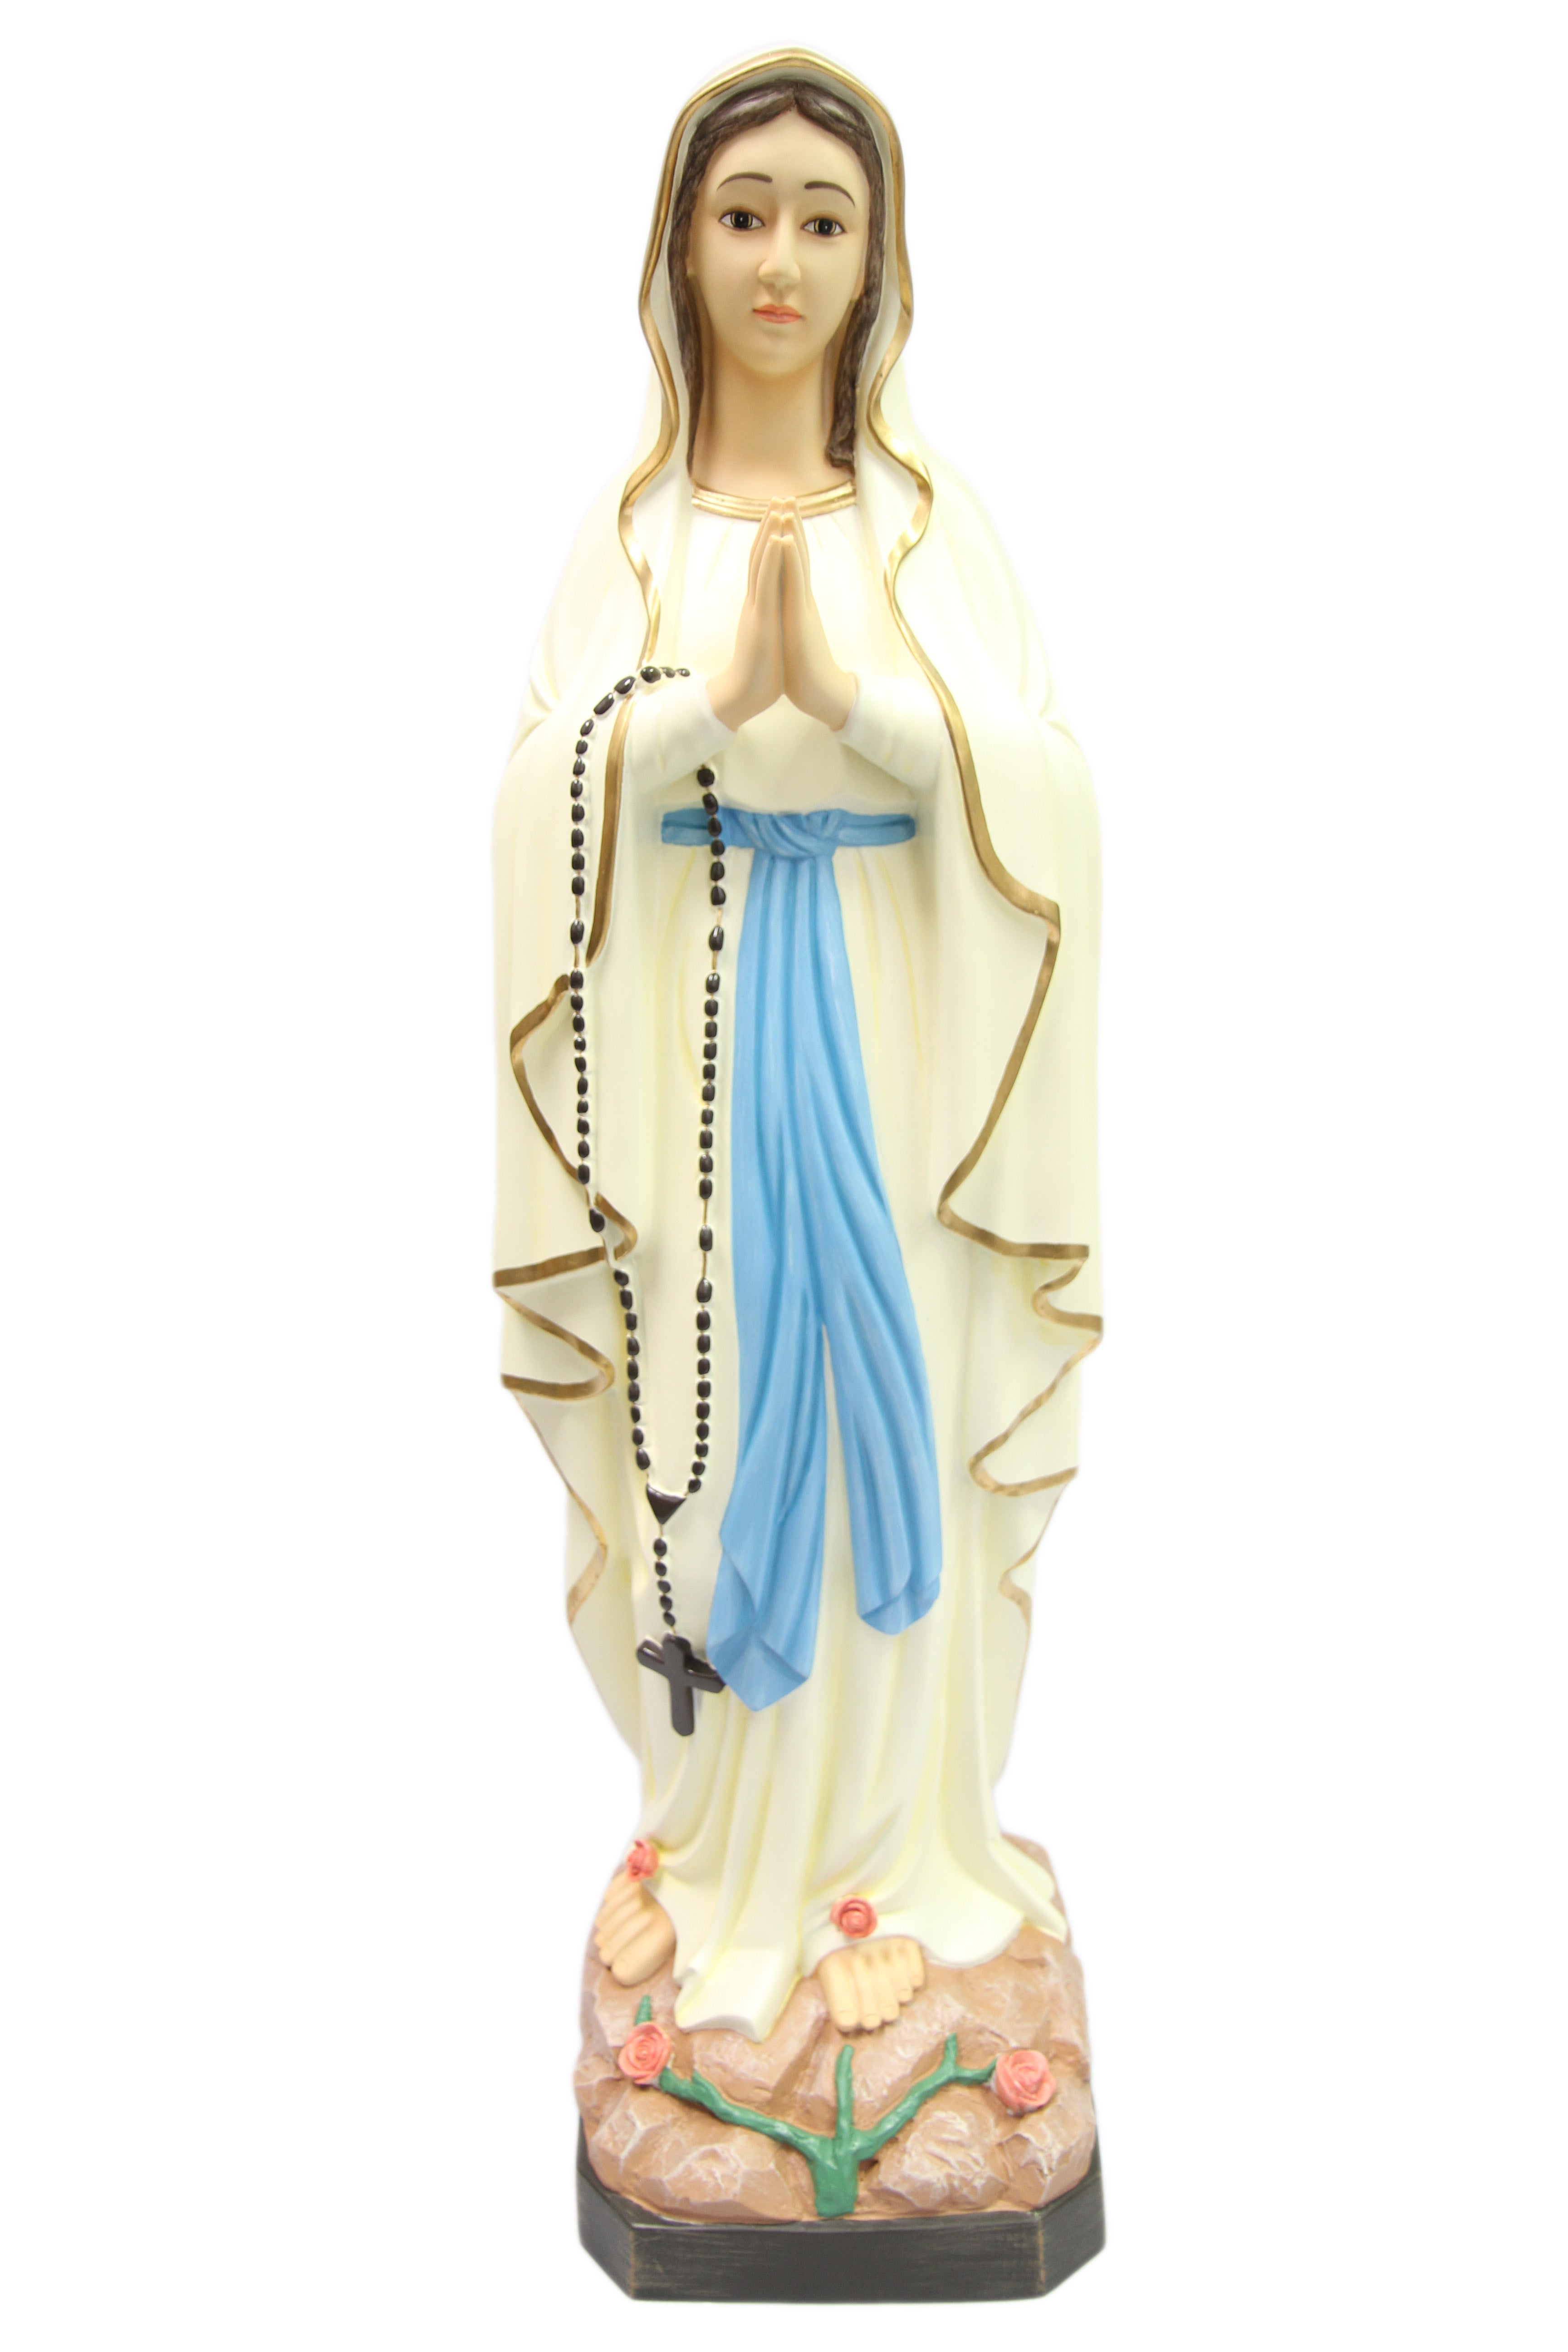 38 Inch Our Lady of Lourdes Virgin Mary Blessed Mother Statue Sculpture Vittoria Collection Made in Italy Catholic